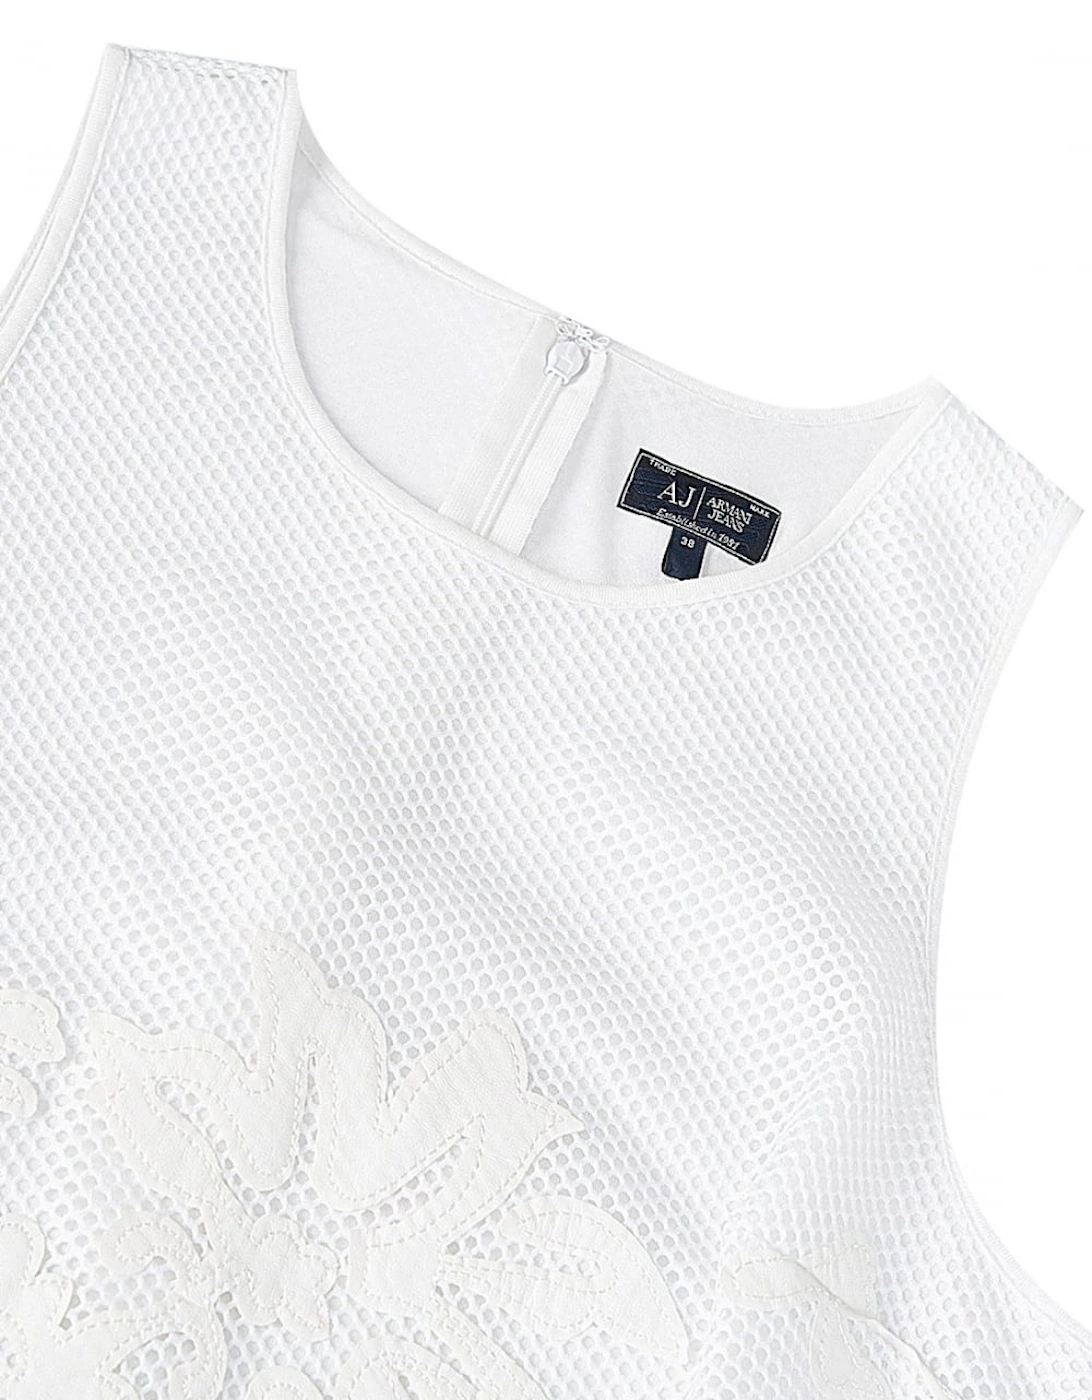 Jeans Womens Mesh Top White